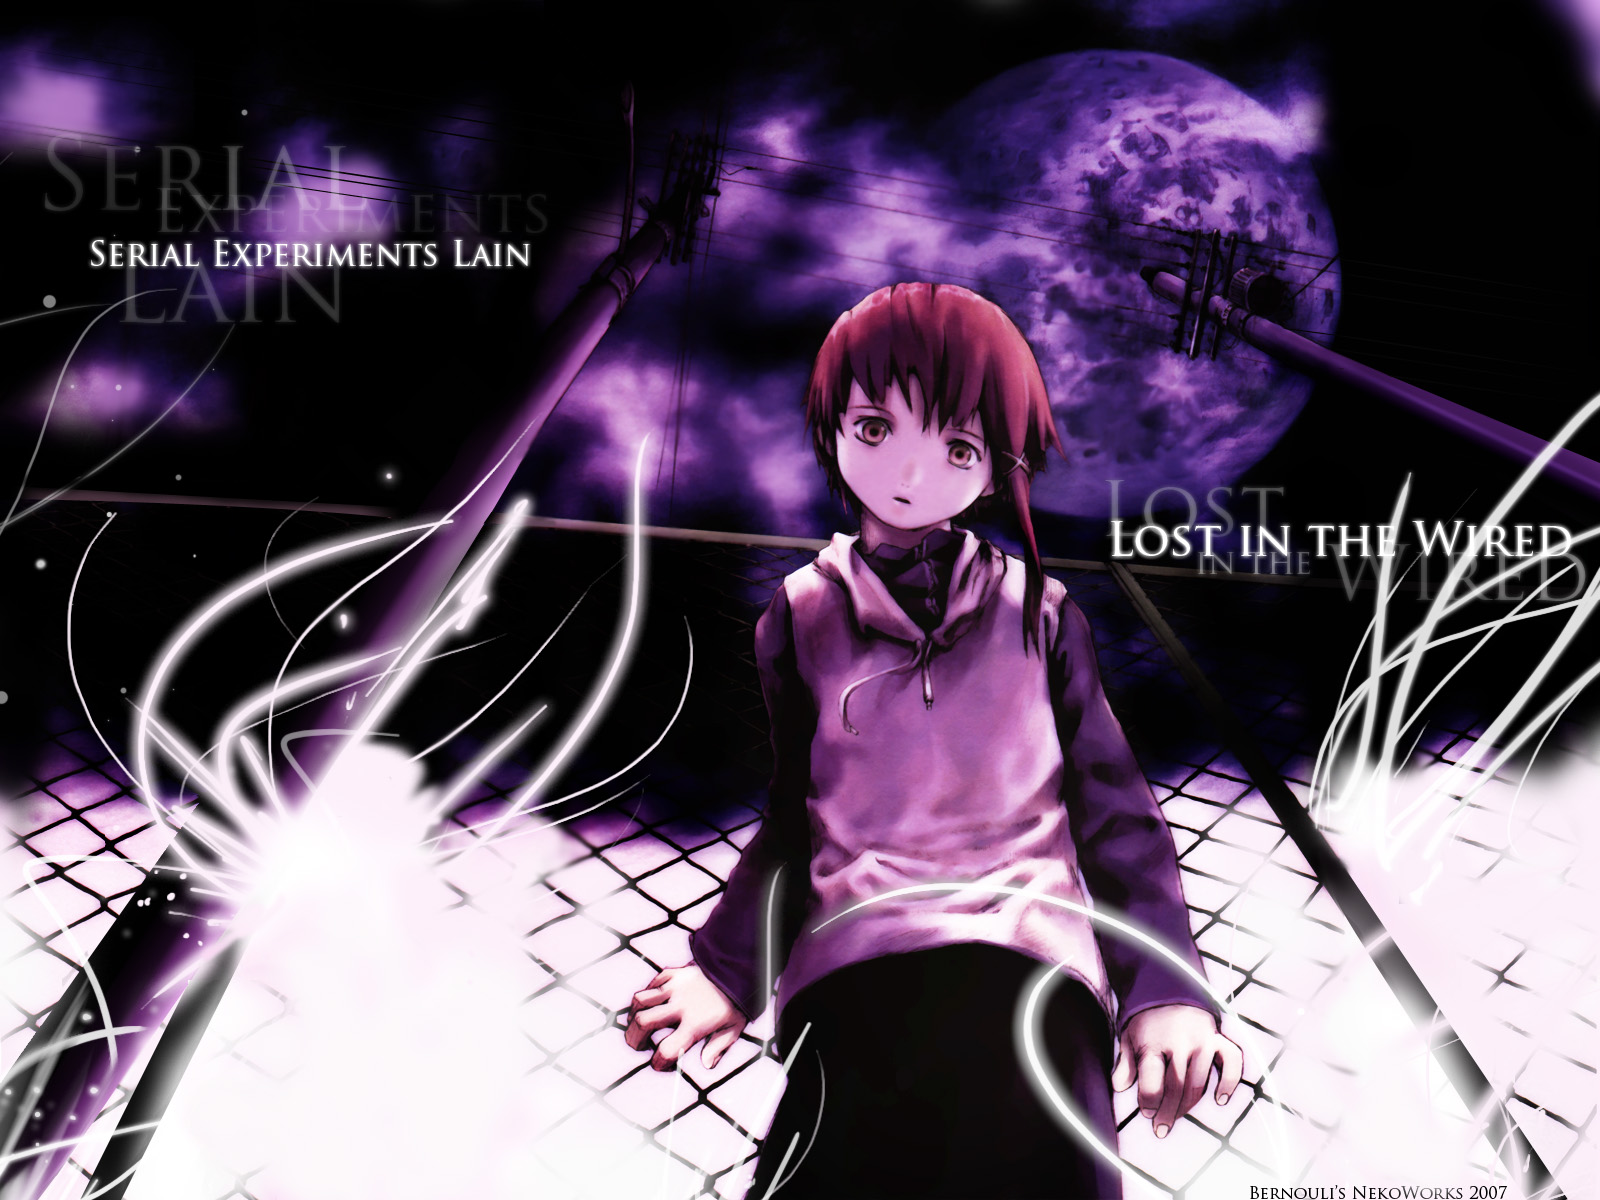 Serial Experiments Lain _ Screenshots | Lie, Experiments, Anime suggestions